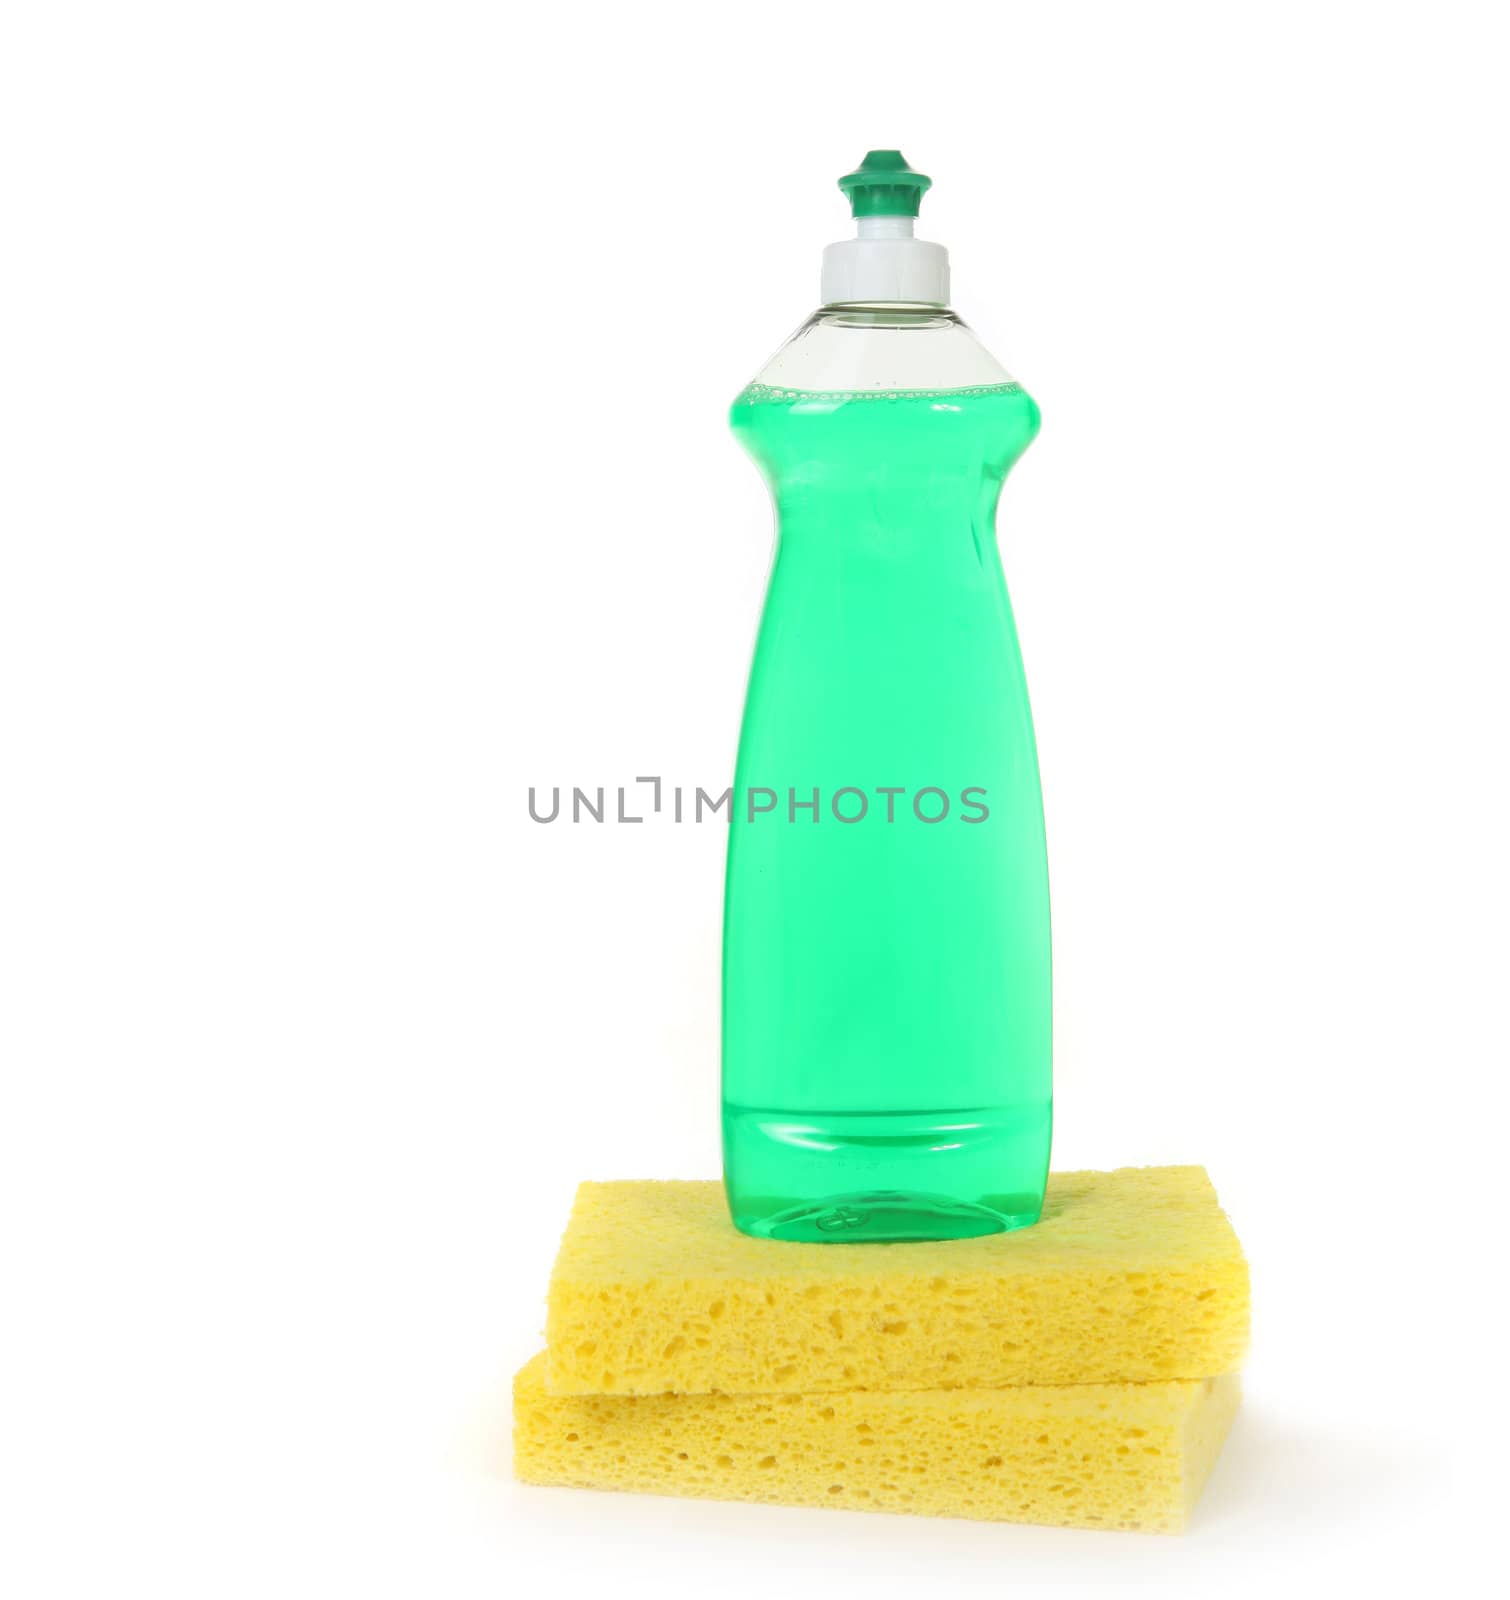 Dishwashing Liquid in a Bottle With 2 Yellow Sponges on White With Copy Space